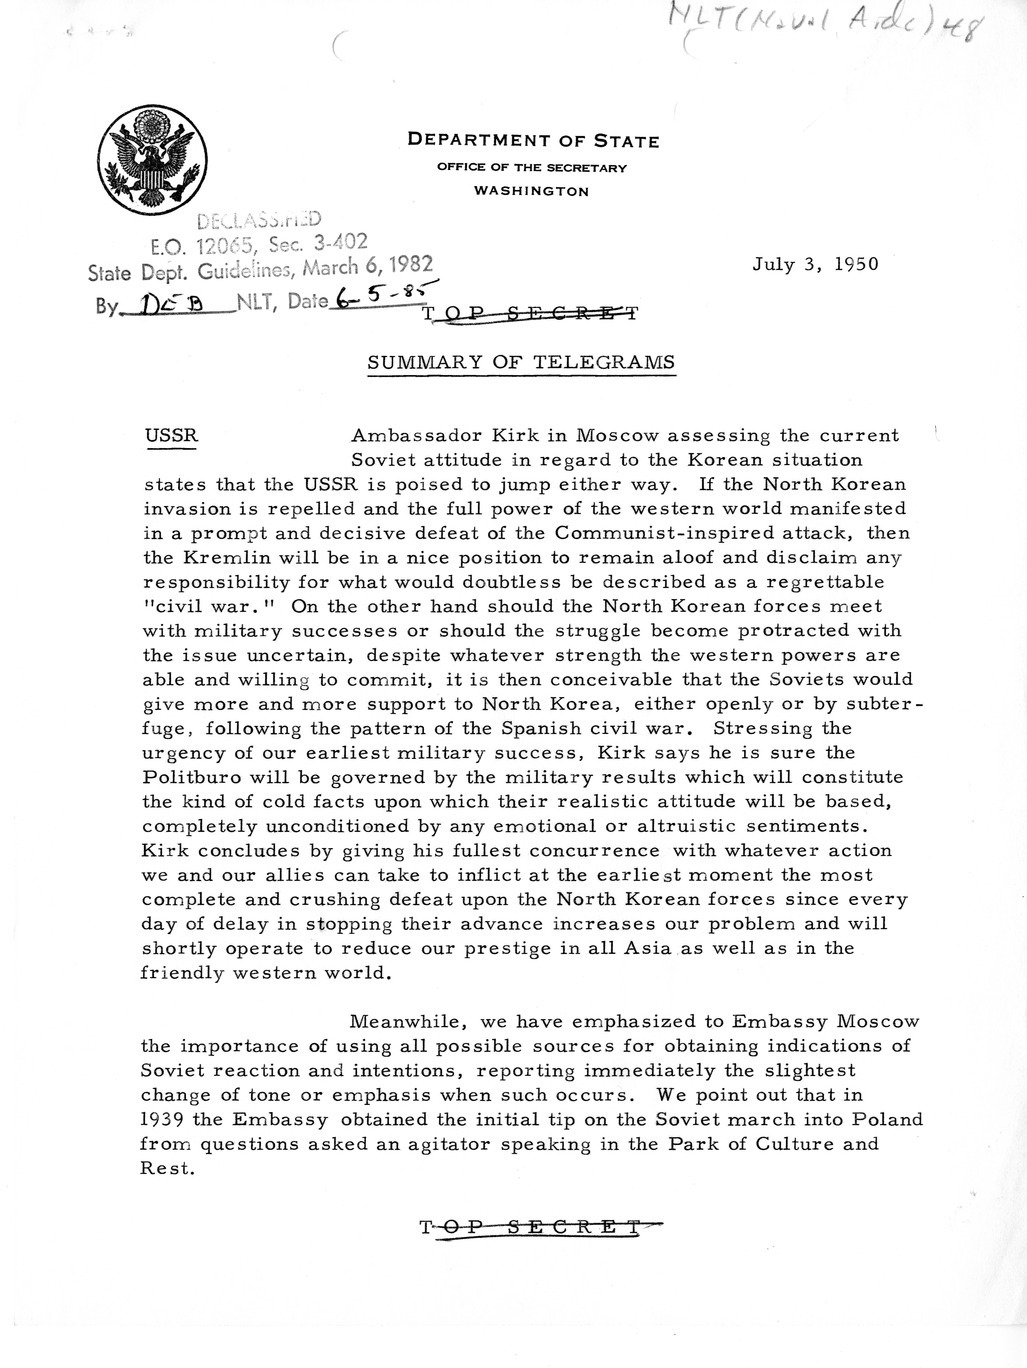 Department of State - Summary of Telegrams